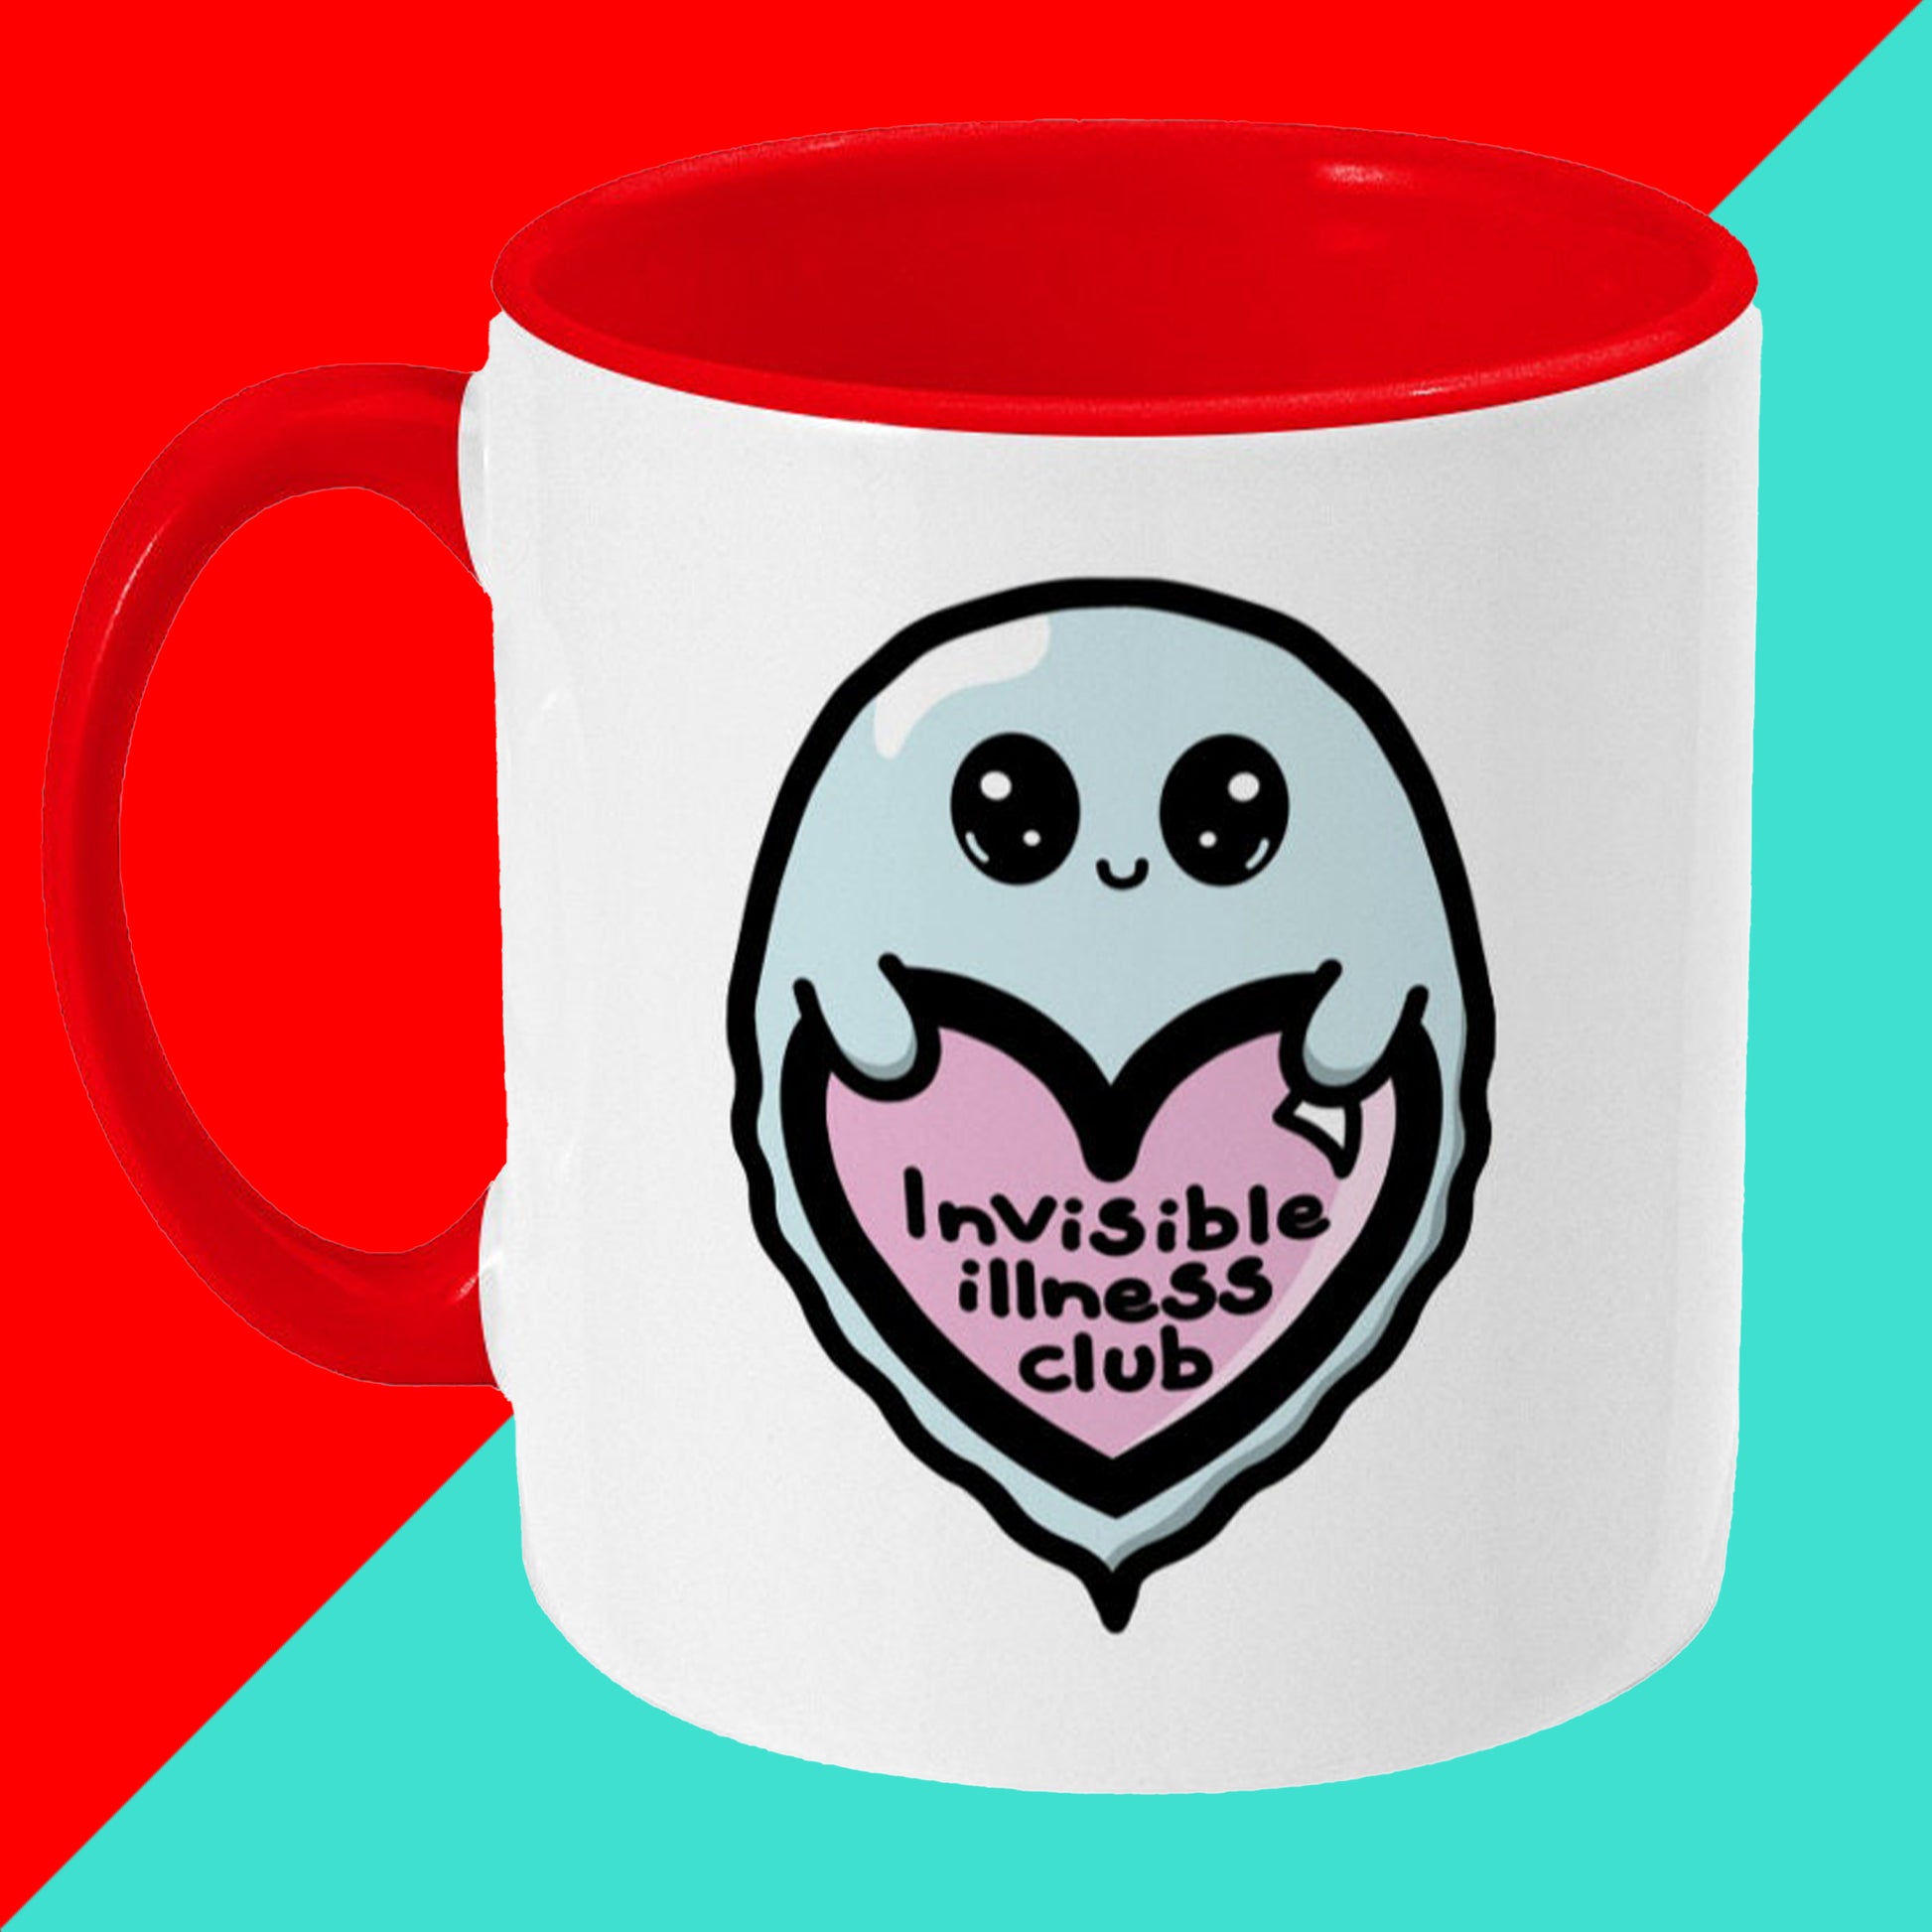 Invisible Illness Club Mug on a red and blue background. The white mug with red handle and inside has an illustration of a cute smiling ghost holding a pink heart with text saying invisible illness club. Hand drawn design made to raise awareness for hidden and chronic illnesses.